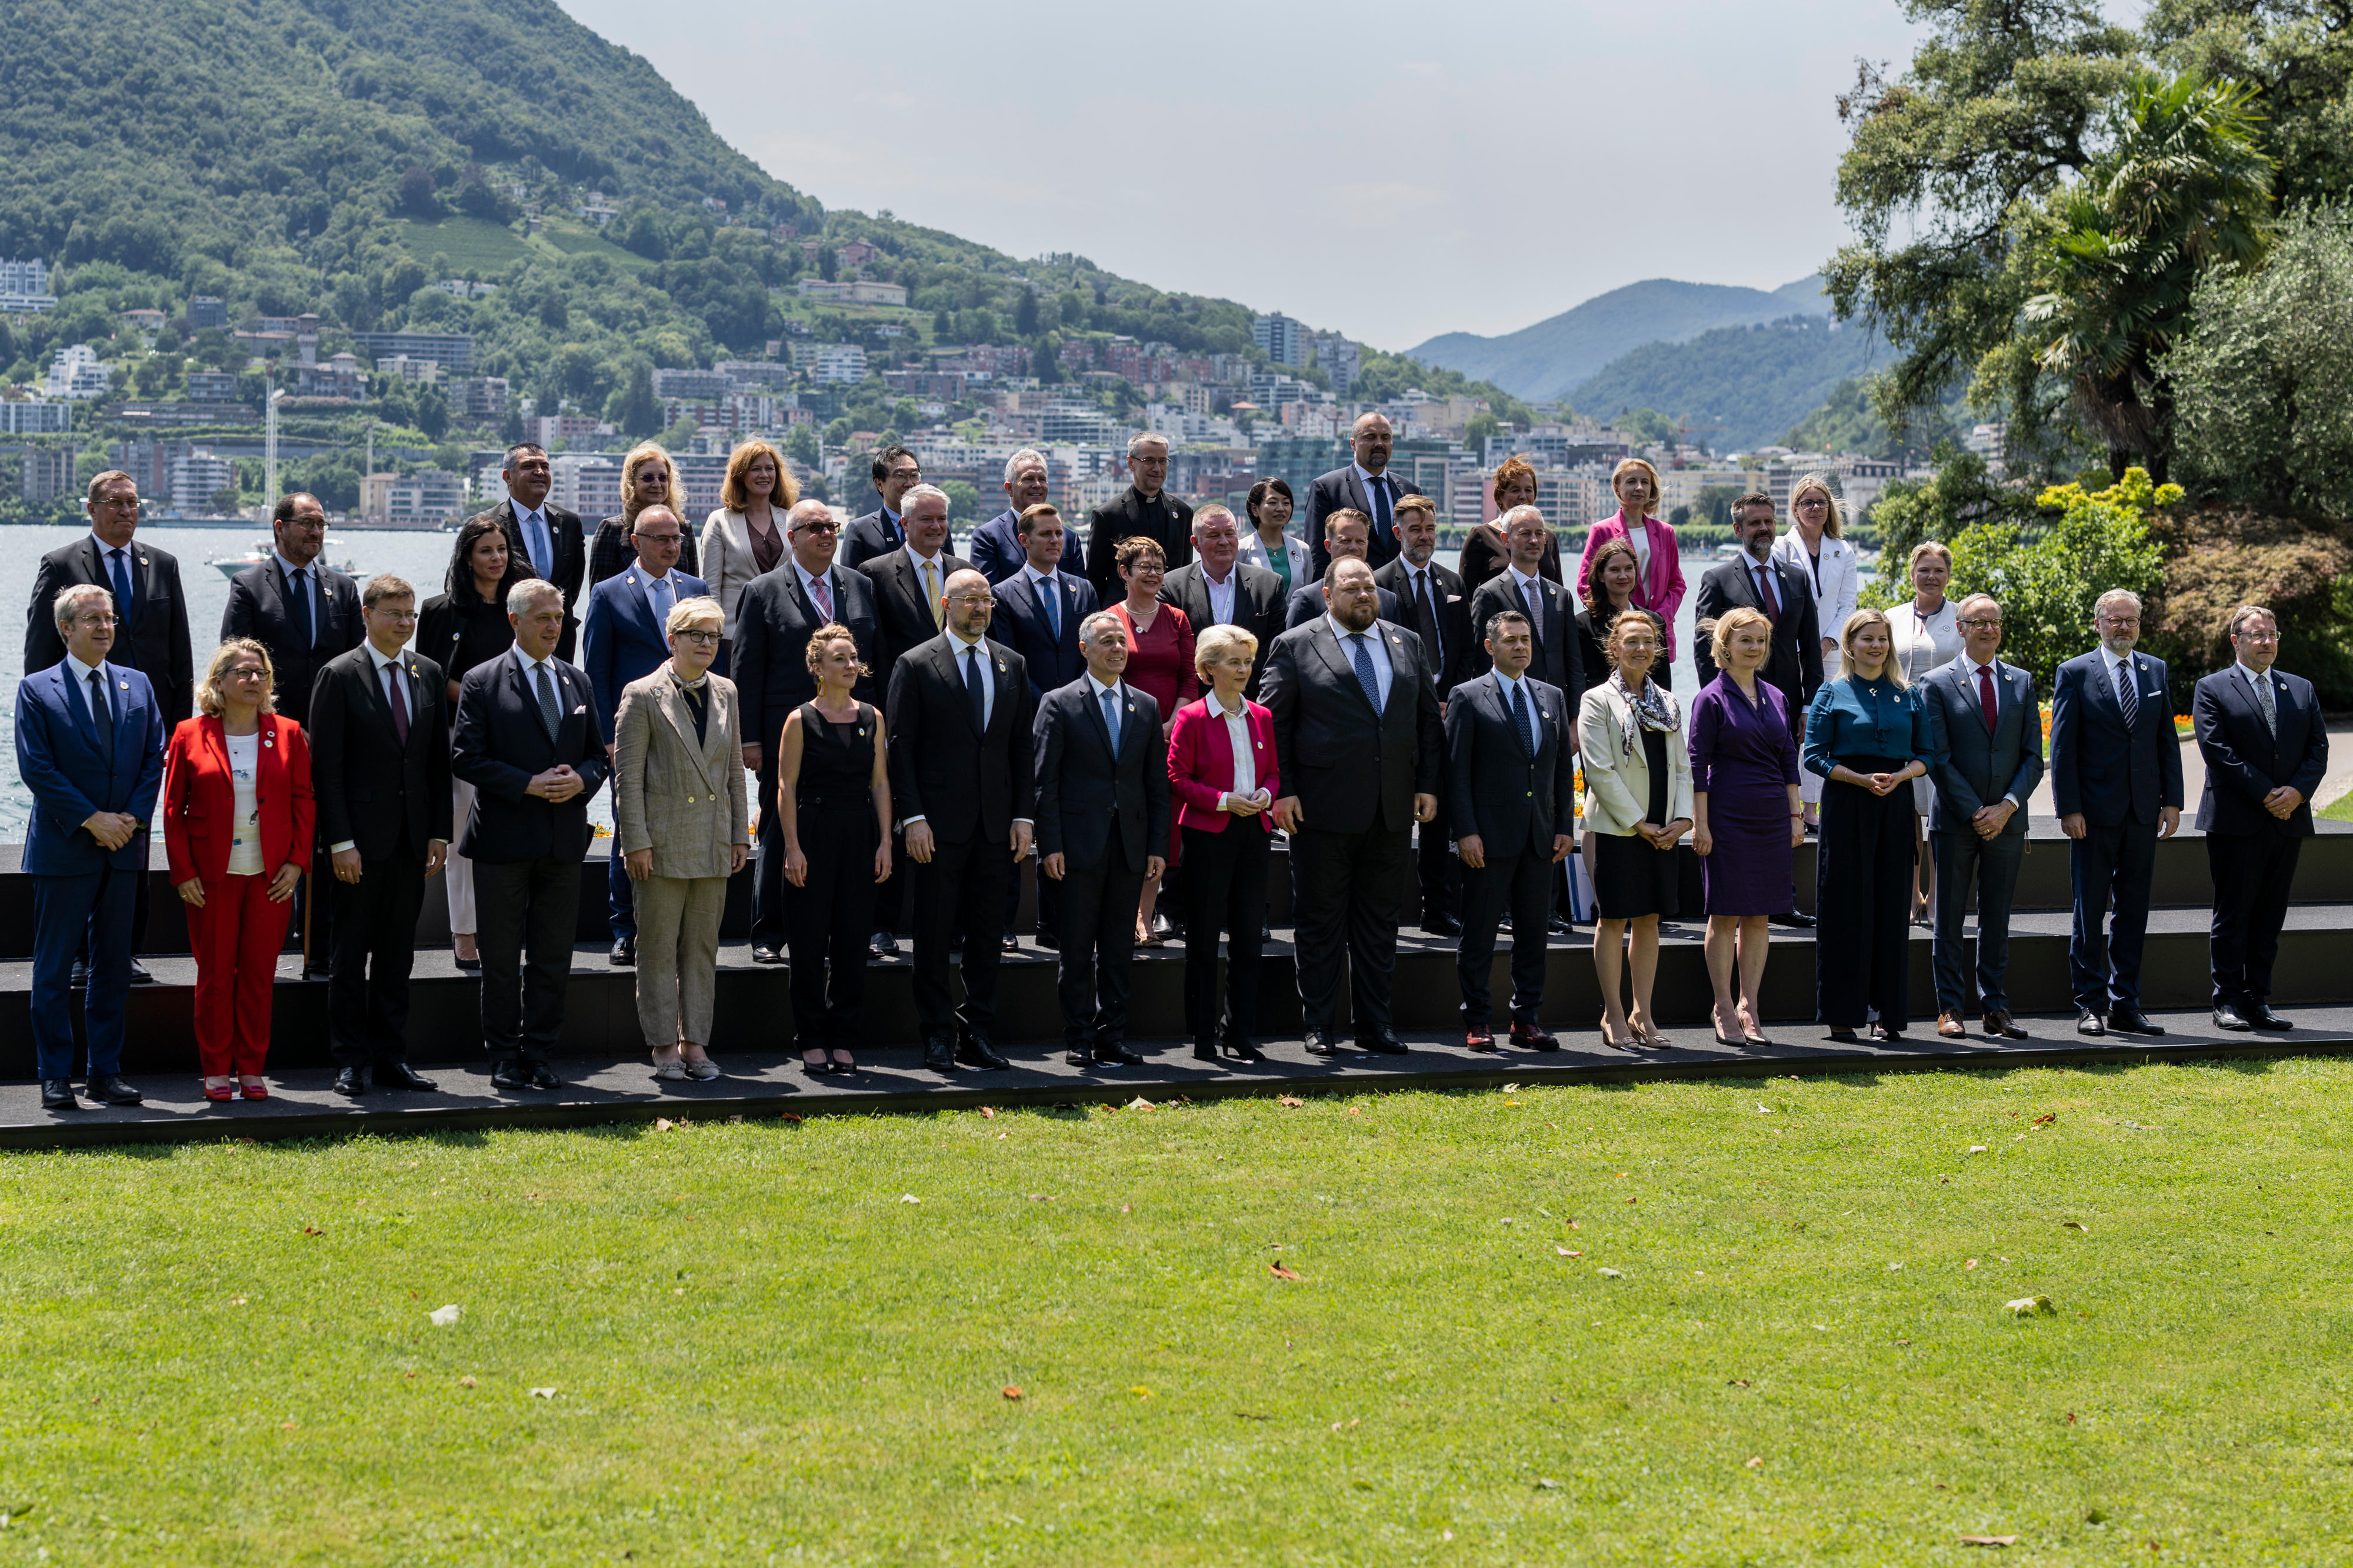 Traditional "family photo" of the delegation leaders during the Ukraine Recovery Conference (URC) on Monday, 4 July 2022, in Lugano, Switzerland